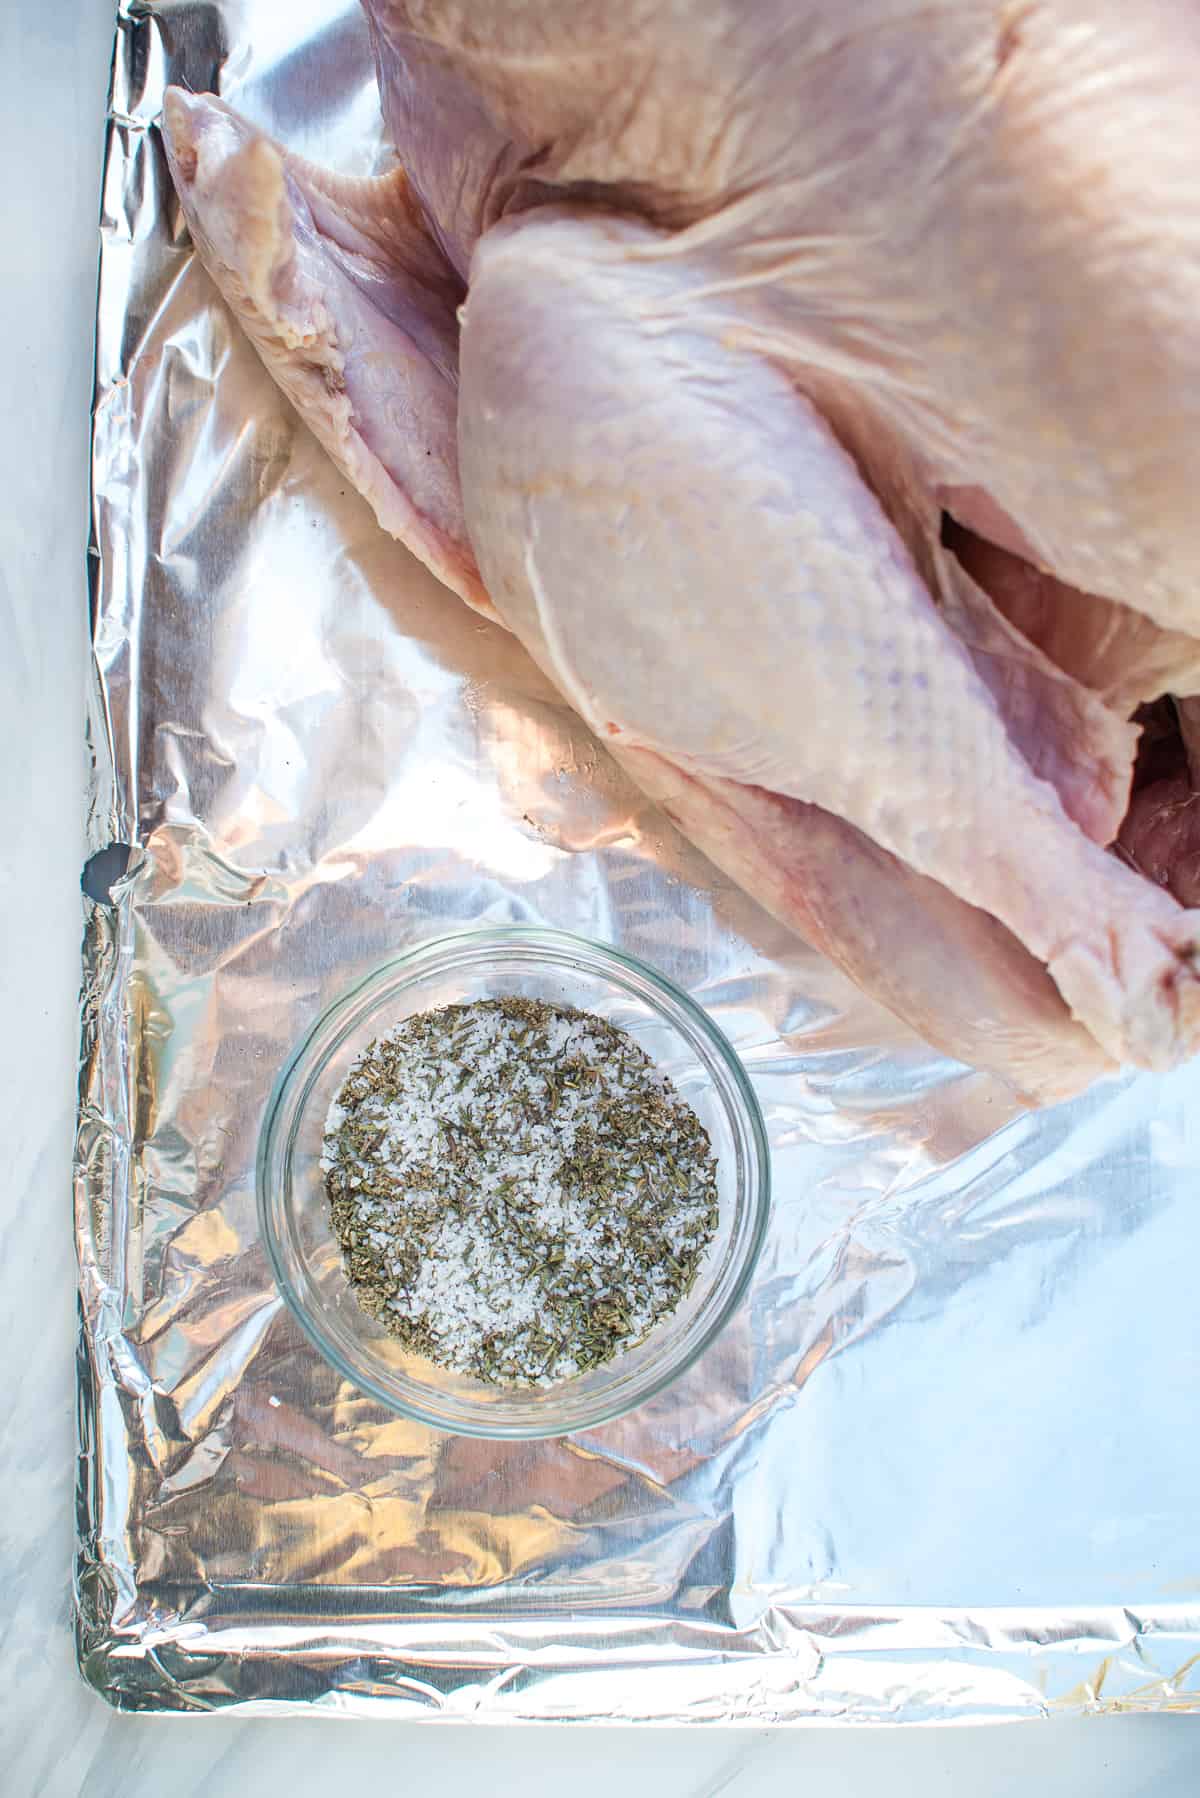 The dry brine ingredients combined in a small bowl next to the turkey.